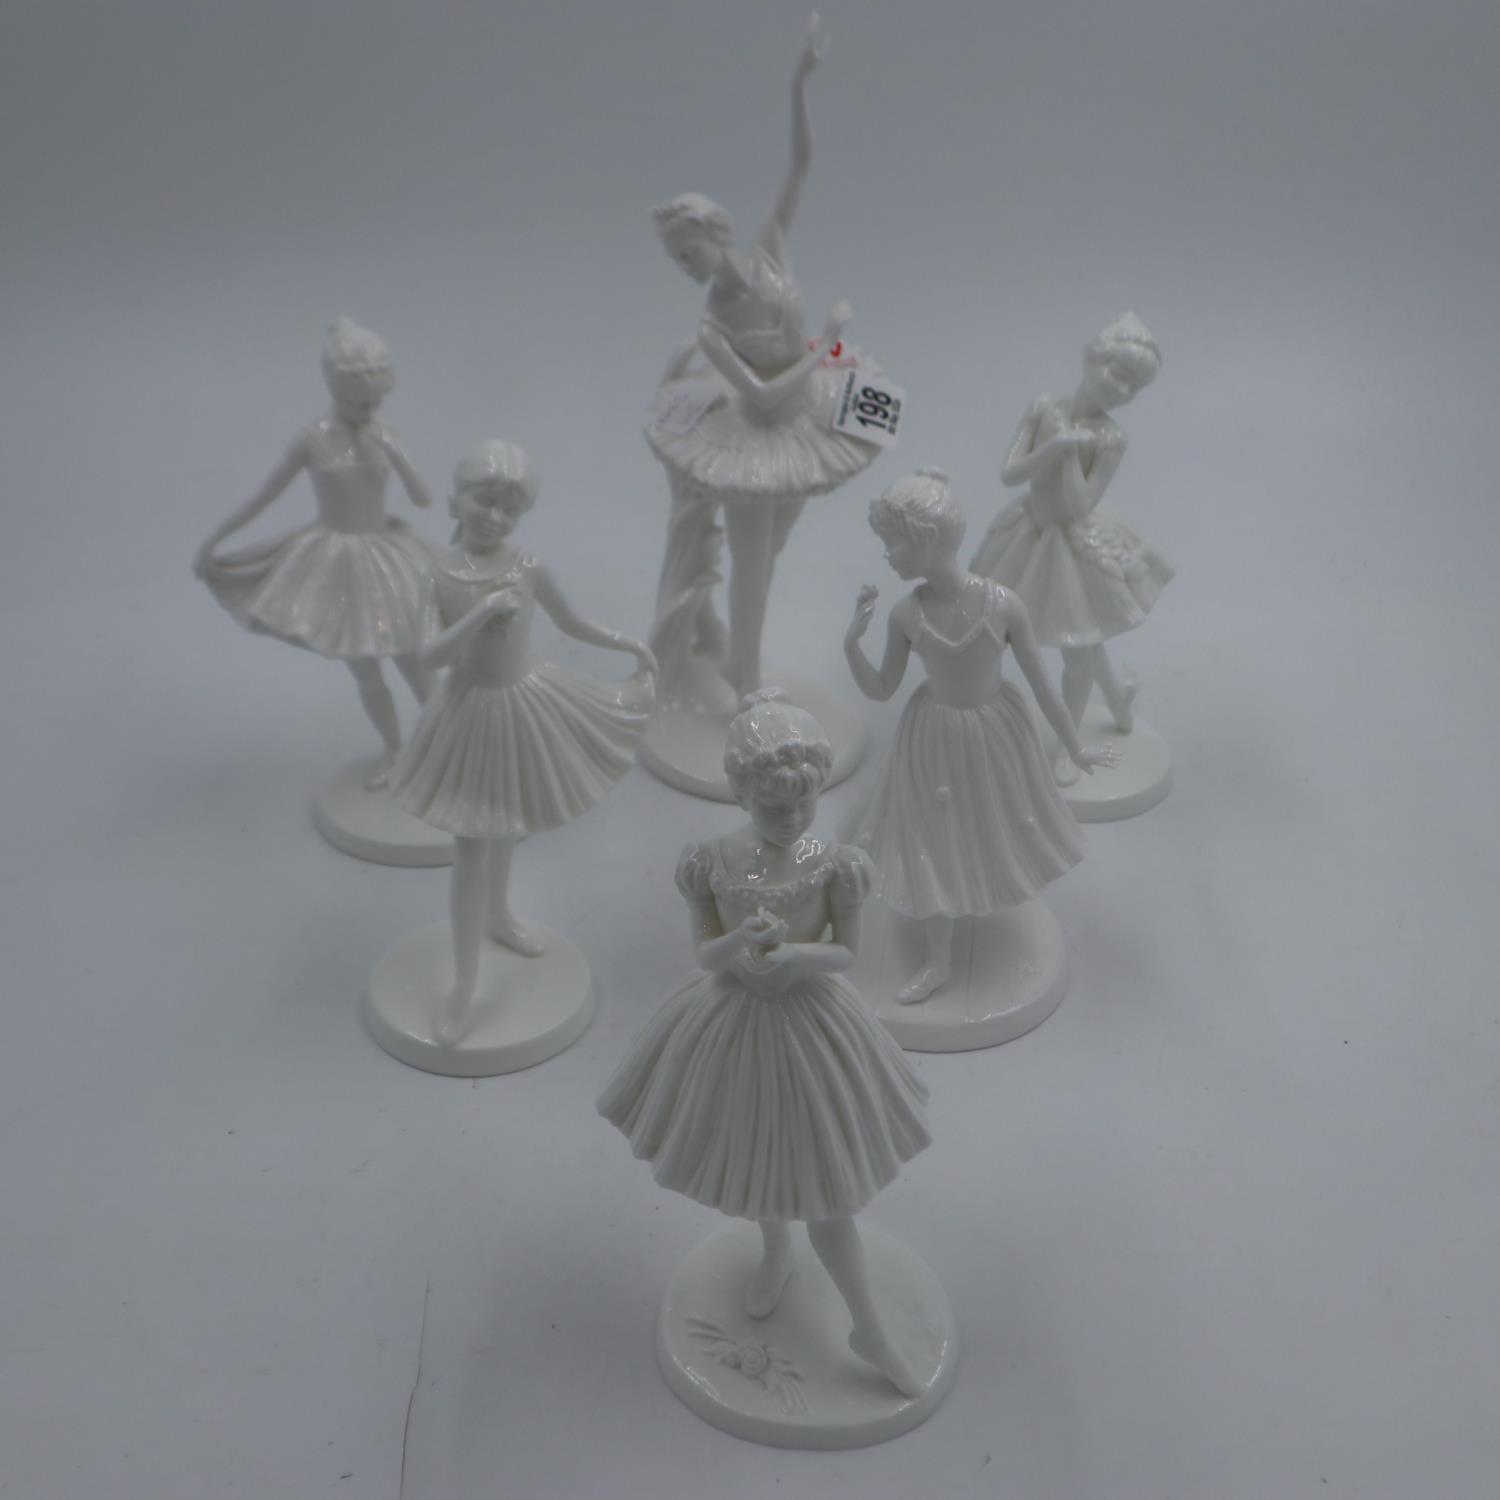 Six Coalport dancing girl figurines, no cracks or chips. UK P&P Group 3 (£30+VAT for the first lot